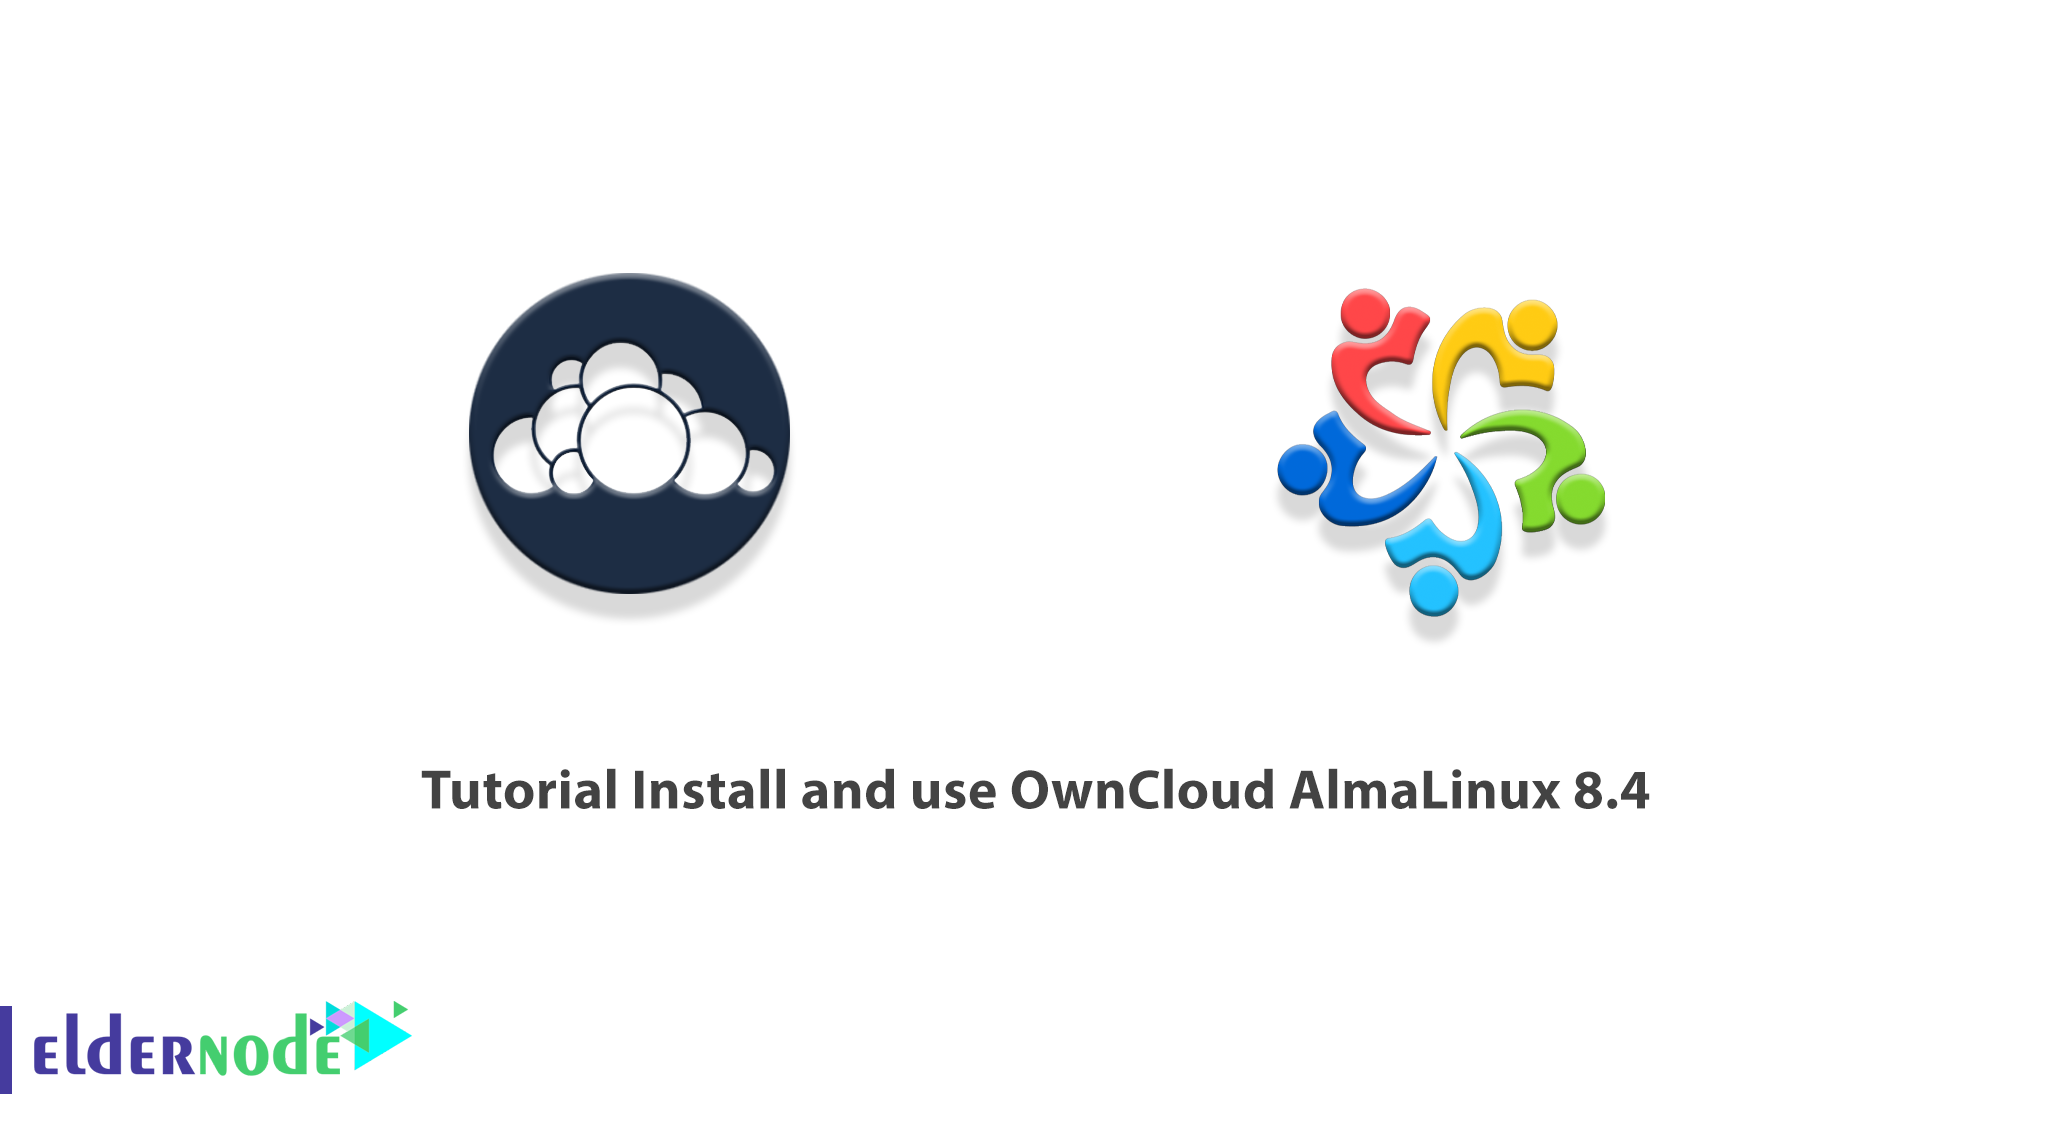 Tutorial Install and use OwnCloud AlmaLinux 8.4